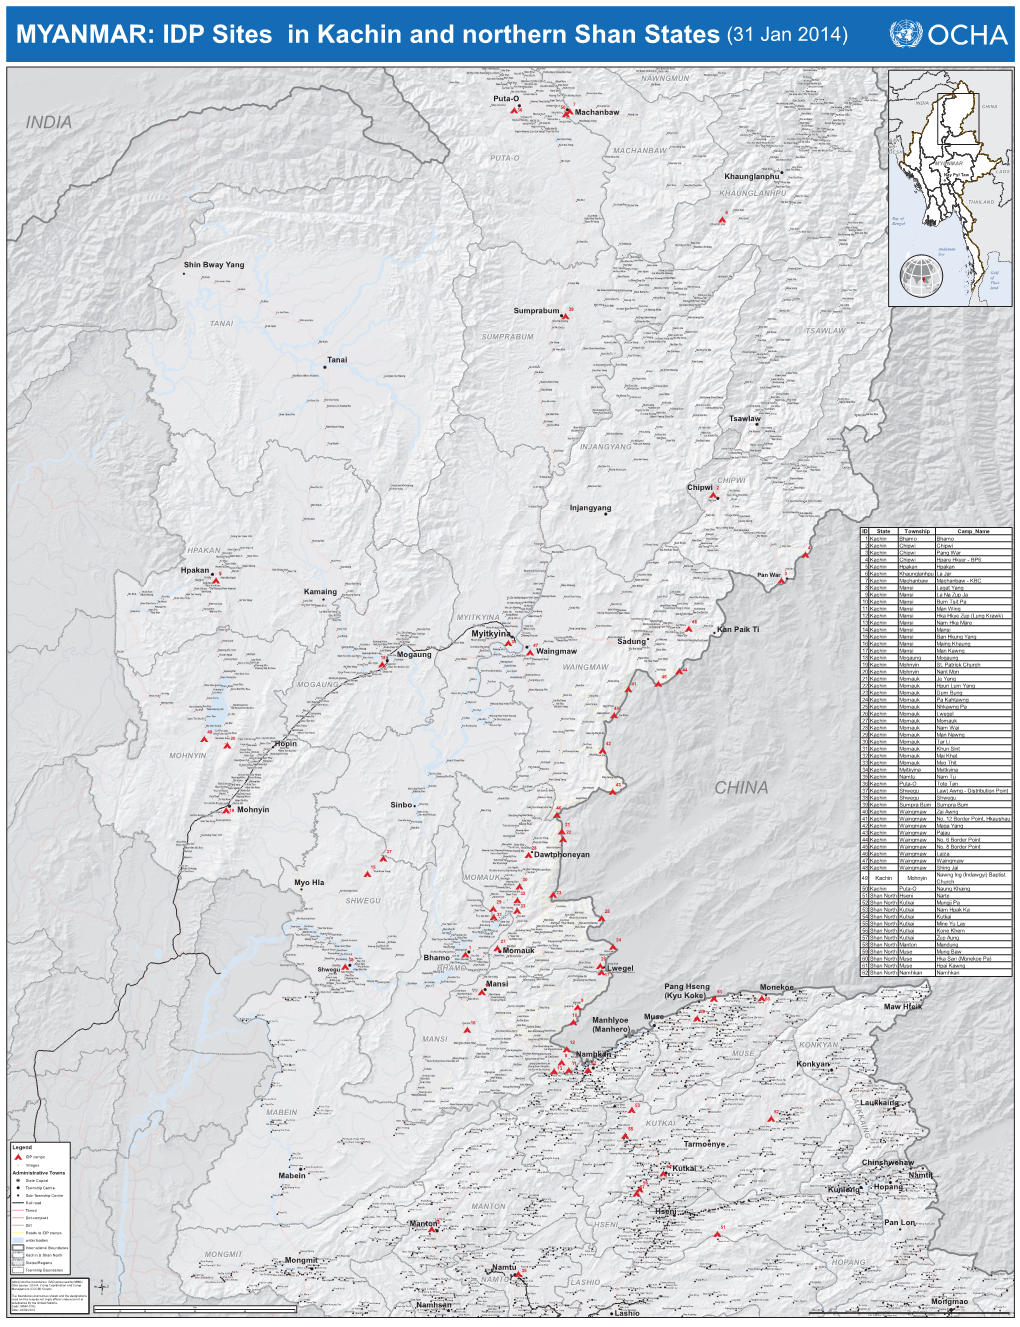 IDP Sites in Kachin and Northern Shan States (31 Jan 2014)